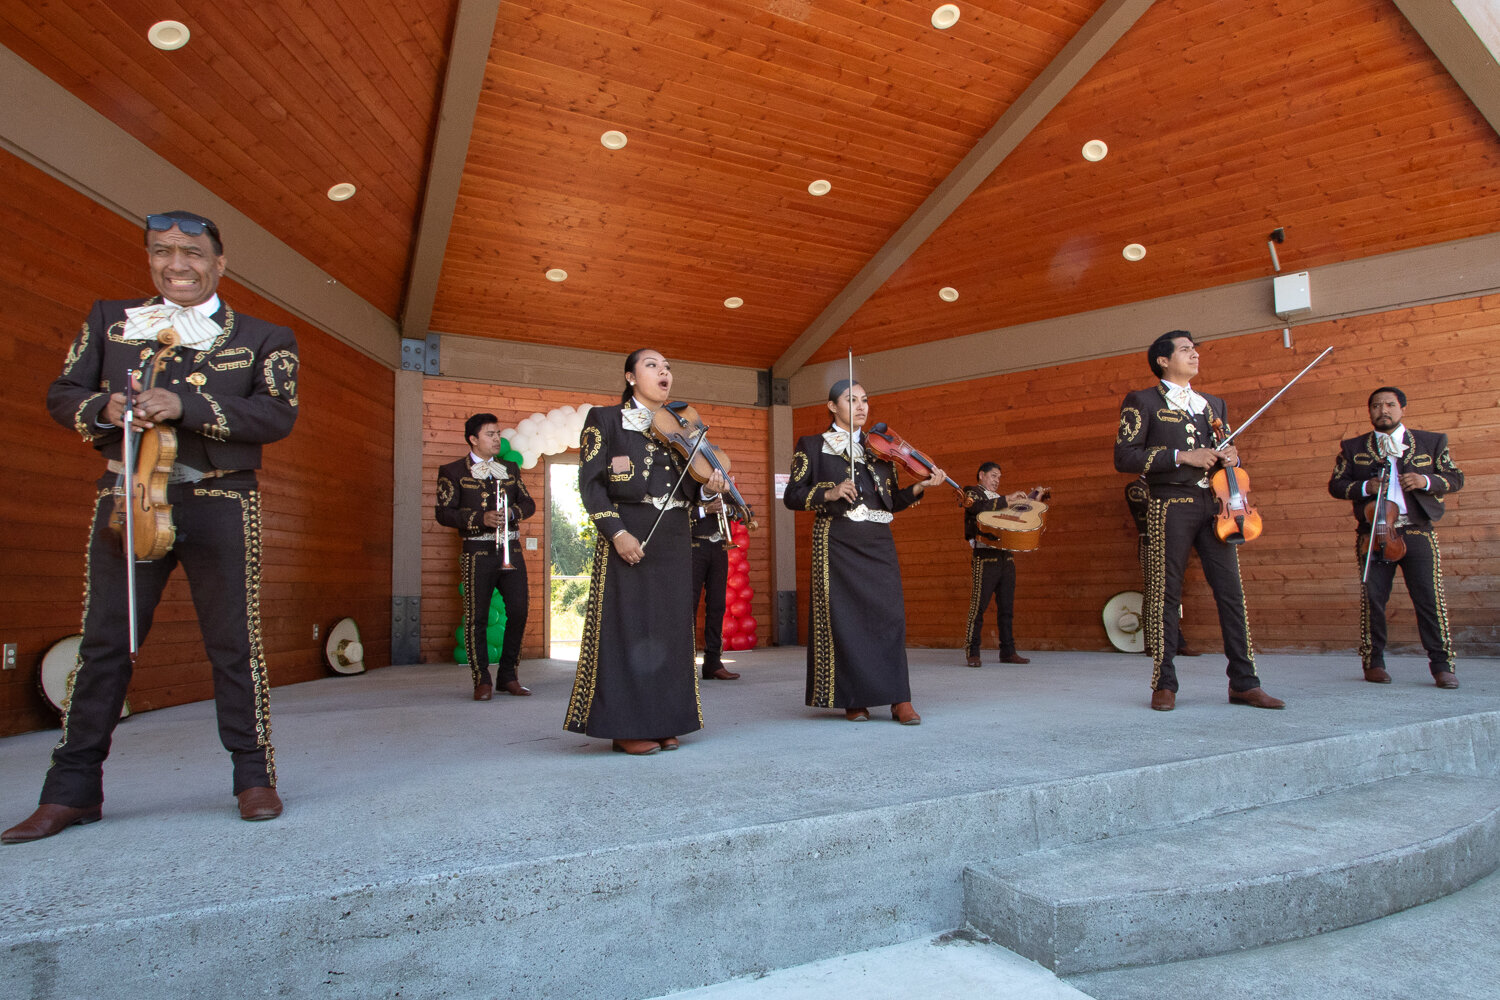 The Tacoma-based band Mariachi Ayutla performed traditional Mexican songs in the Klickitat Prairie Park amphitheater for the Mexican Independence Day celebration in Mossyrock on Saturday, Sept. 1The Tacoma-based band Mariachi Ayutla performed traditional Mexican songs in the Klickitat Prairie Park amphitheater for the Mexican Independence Day celebration in Mossyrock on Saturday, Sept. 16.